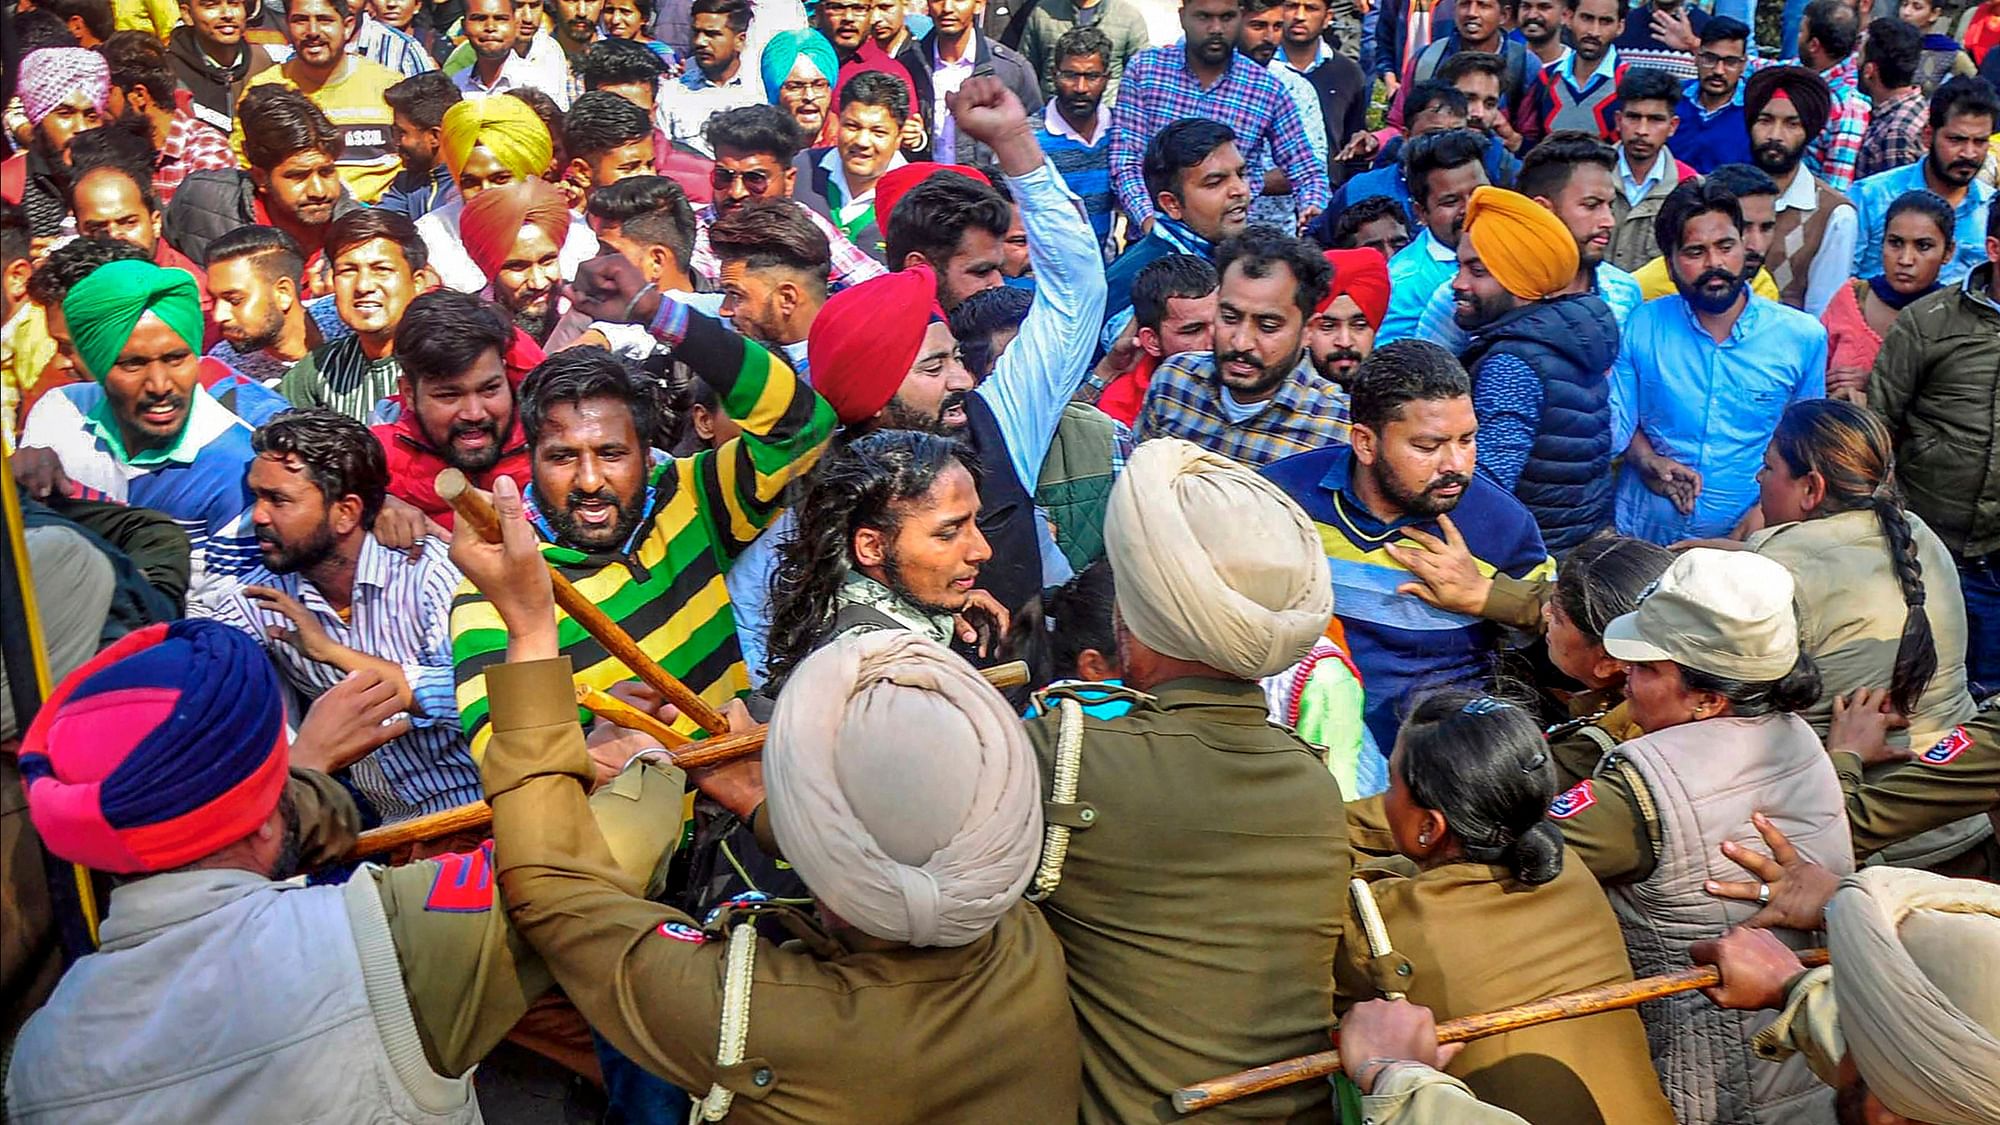 Police lathicharging protesters in Patiala during a march.